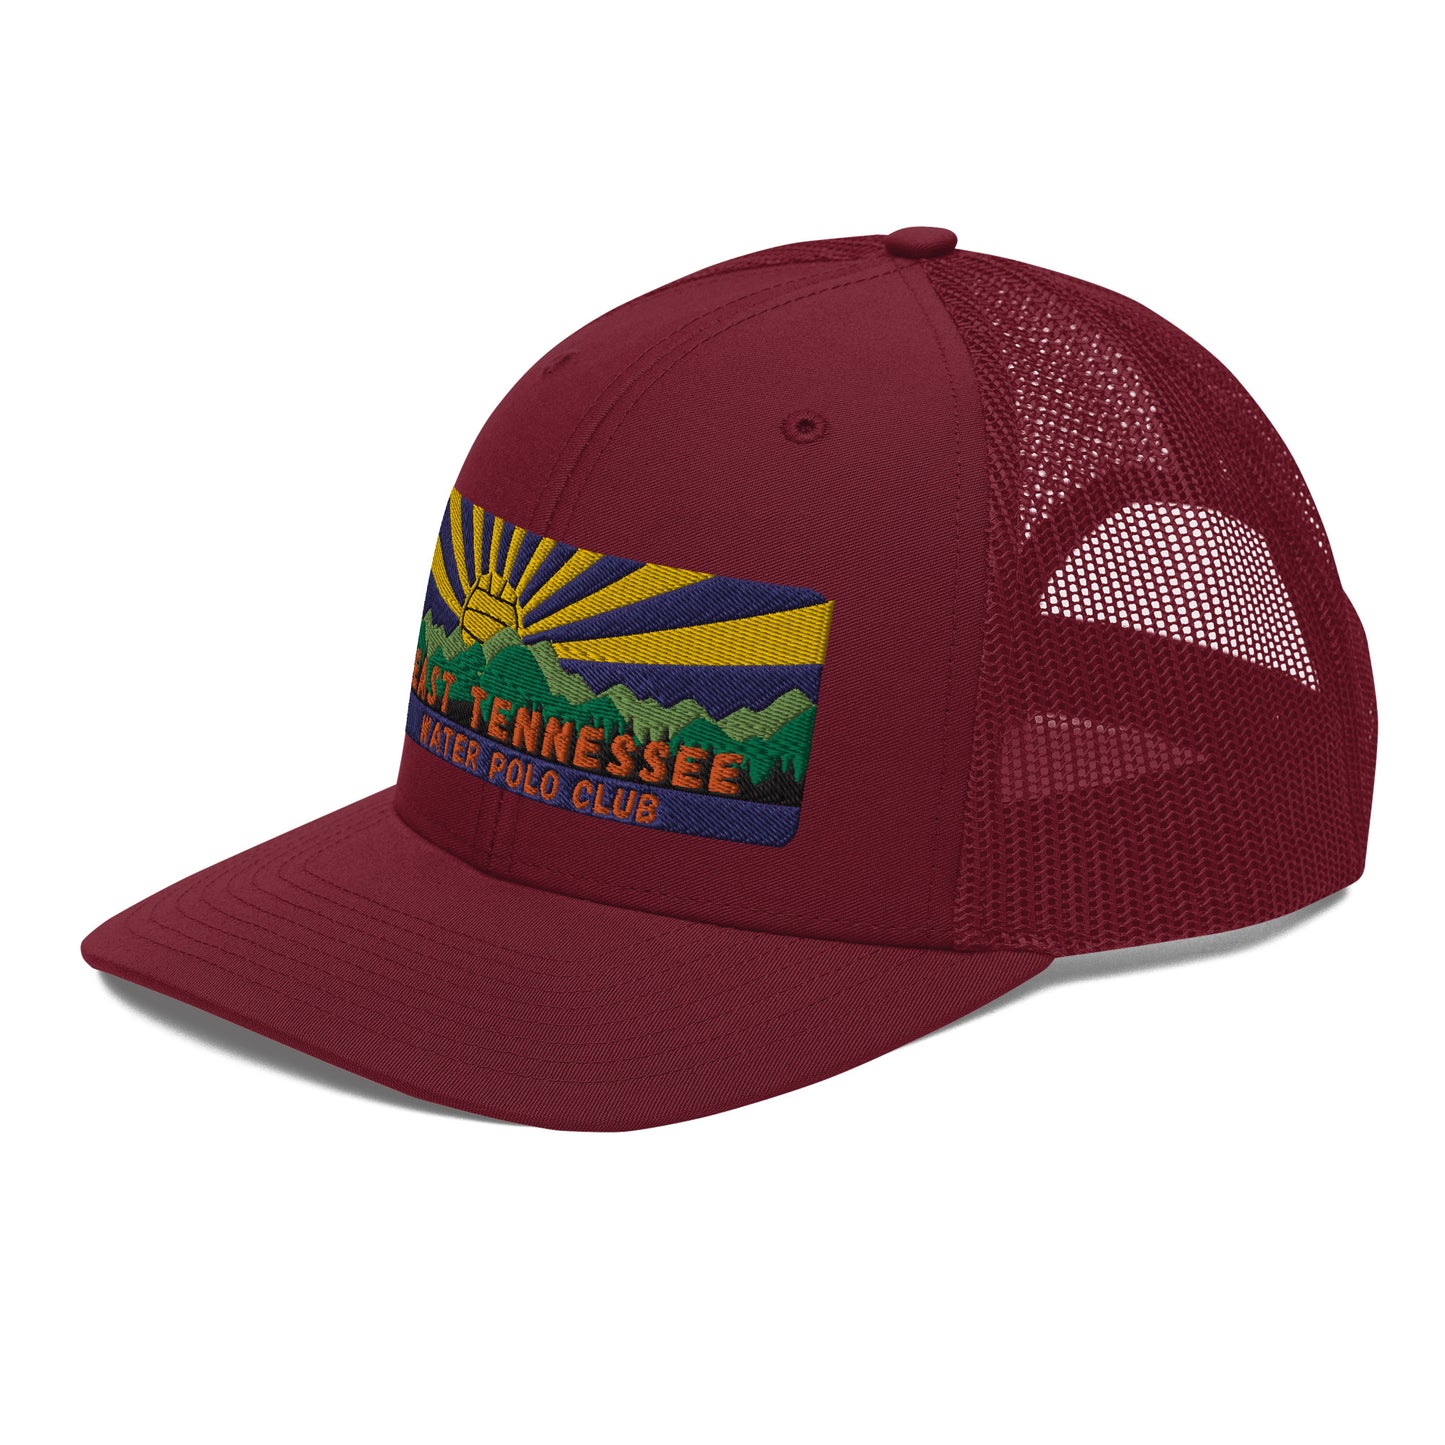 East Tennessee WPC Trucker Cap (w/sun rays)